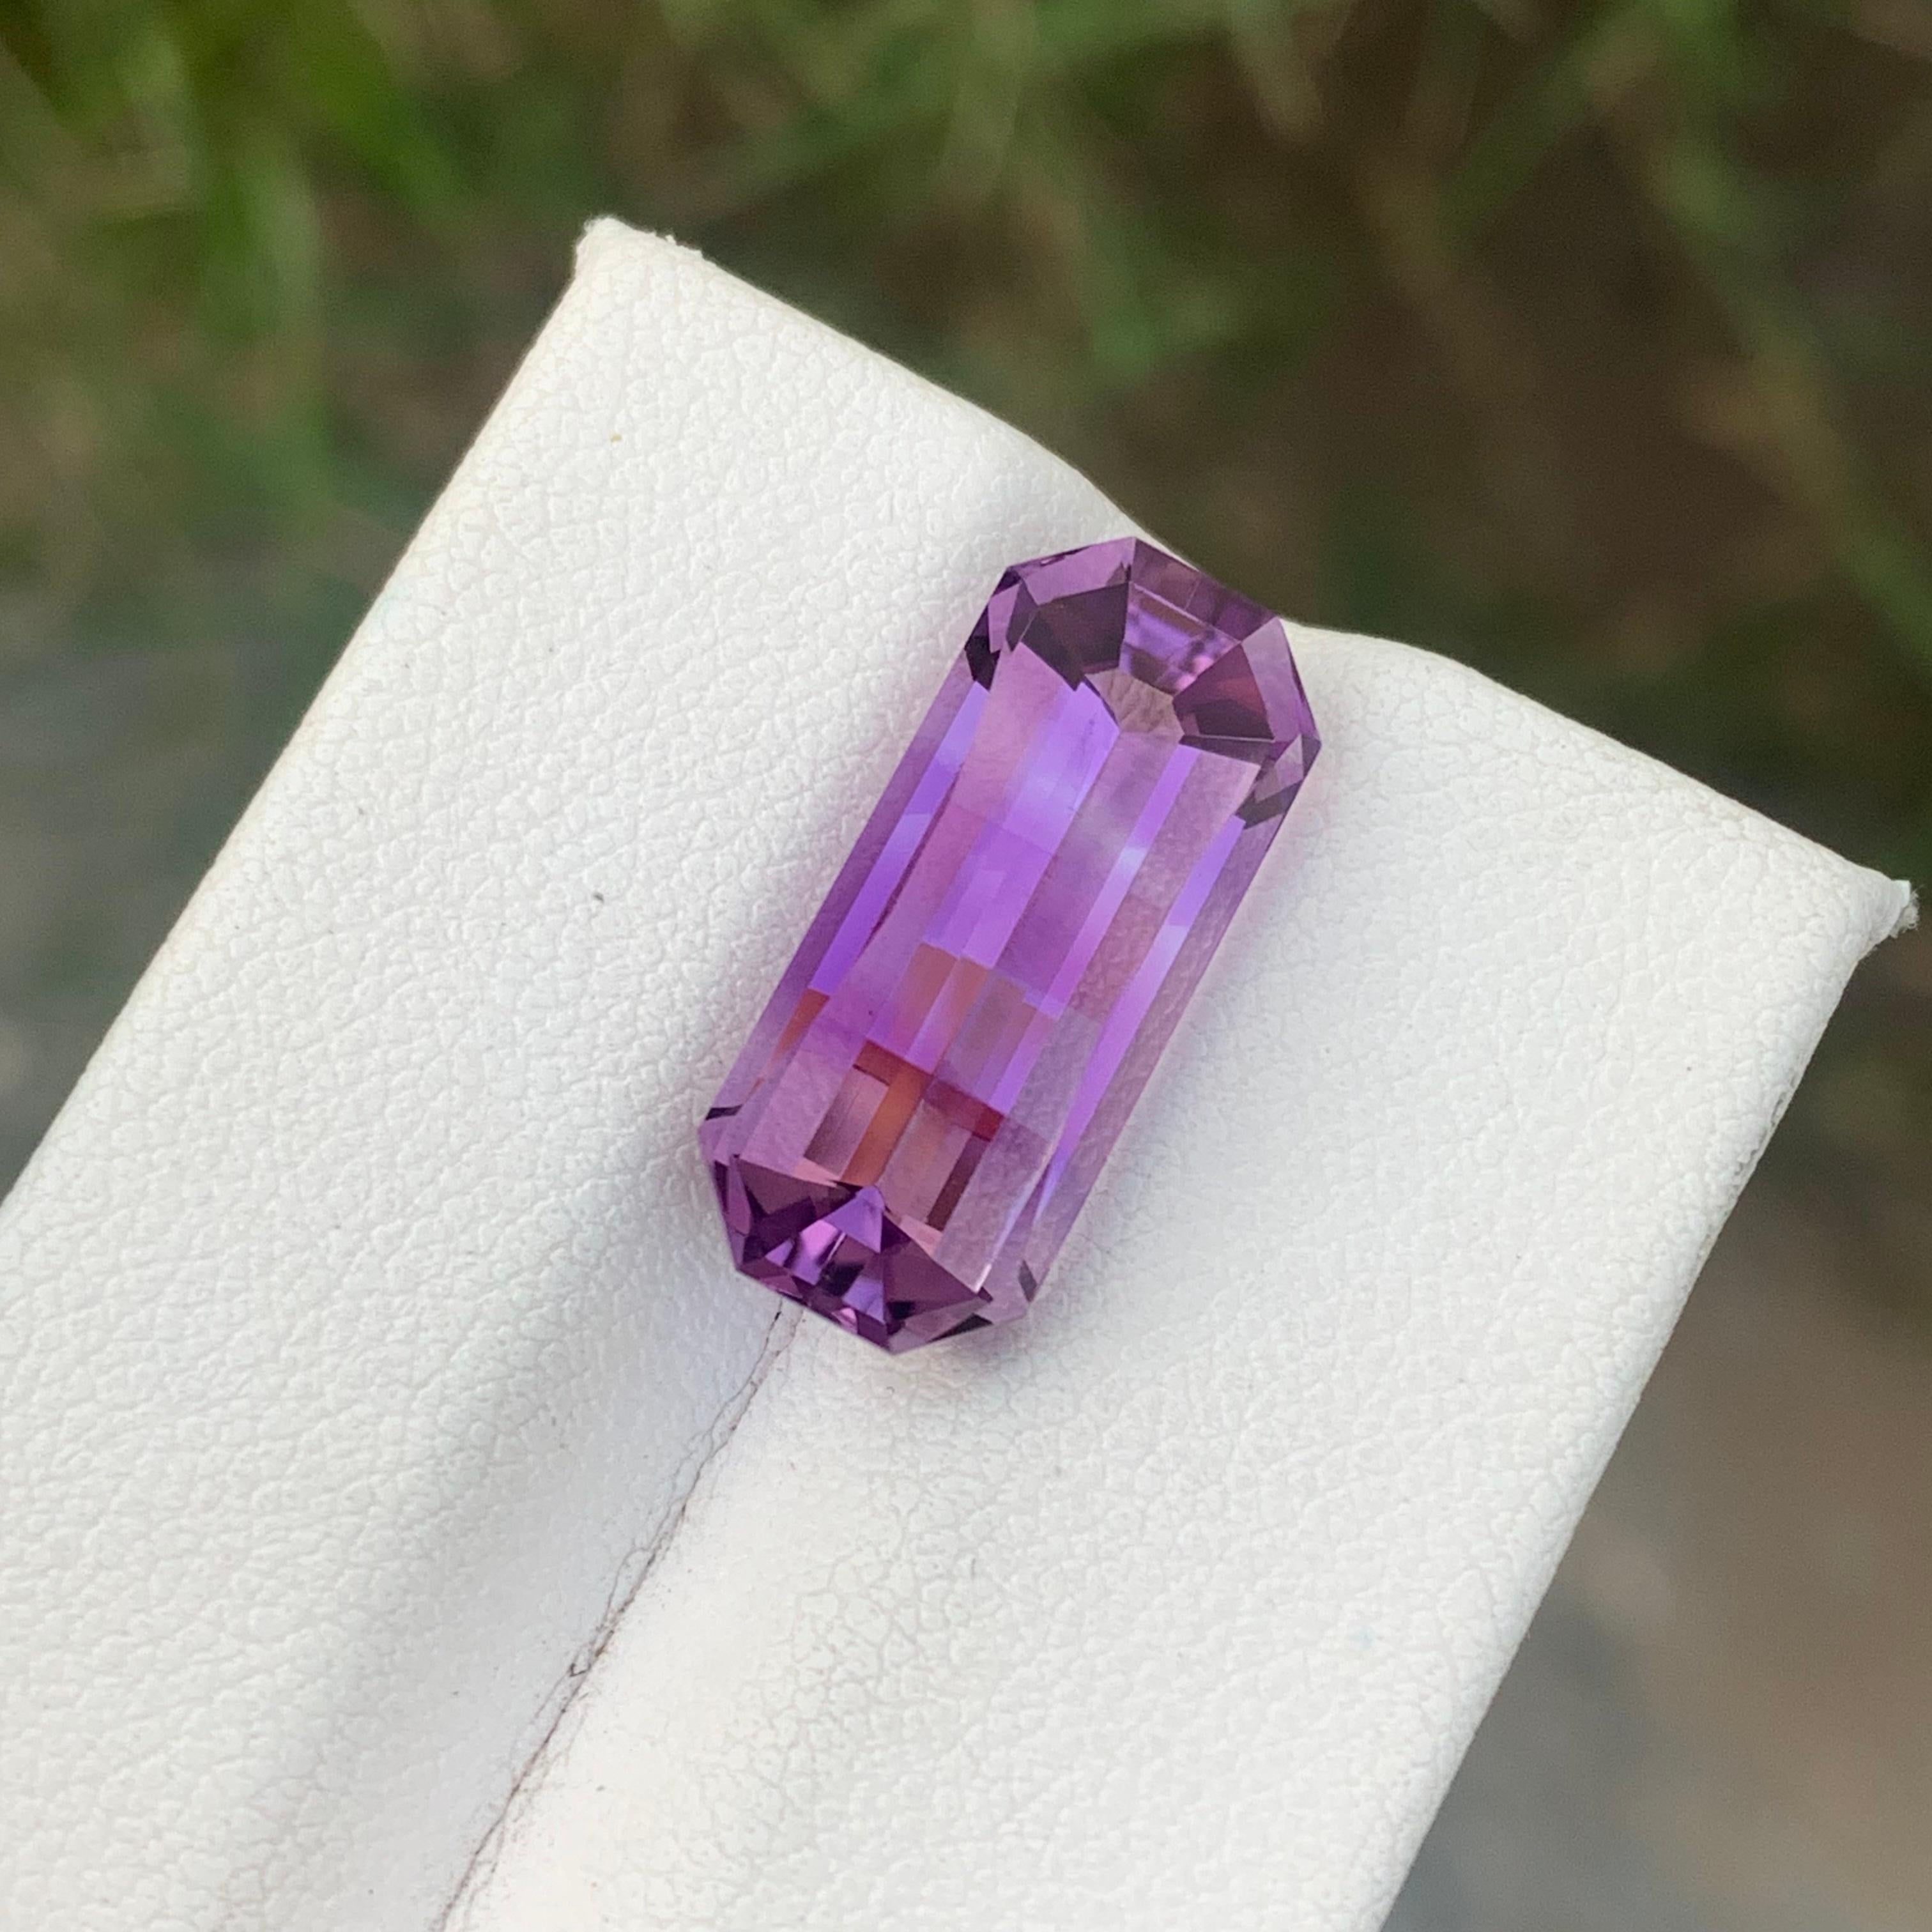 8.25cts Natural Loose Amethyst Gemstone Pixel Pixelated Cut From Brazil Mine In New Condition For Sale In Peshawar, PK